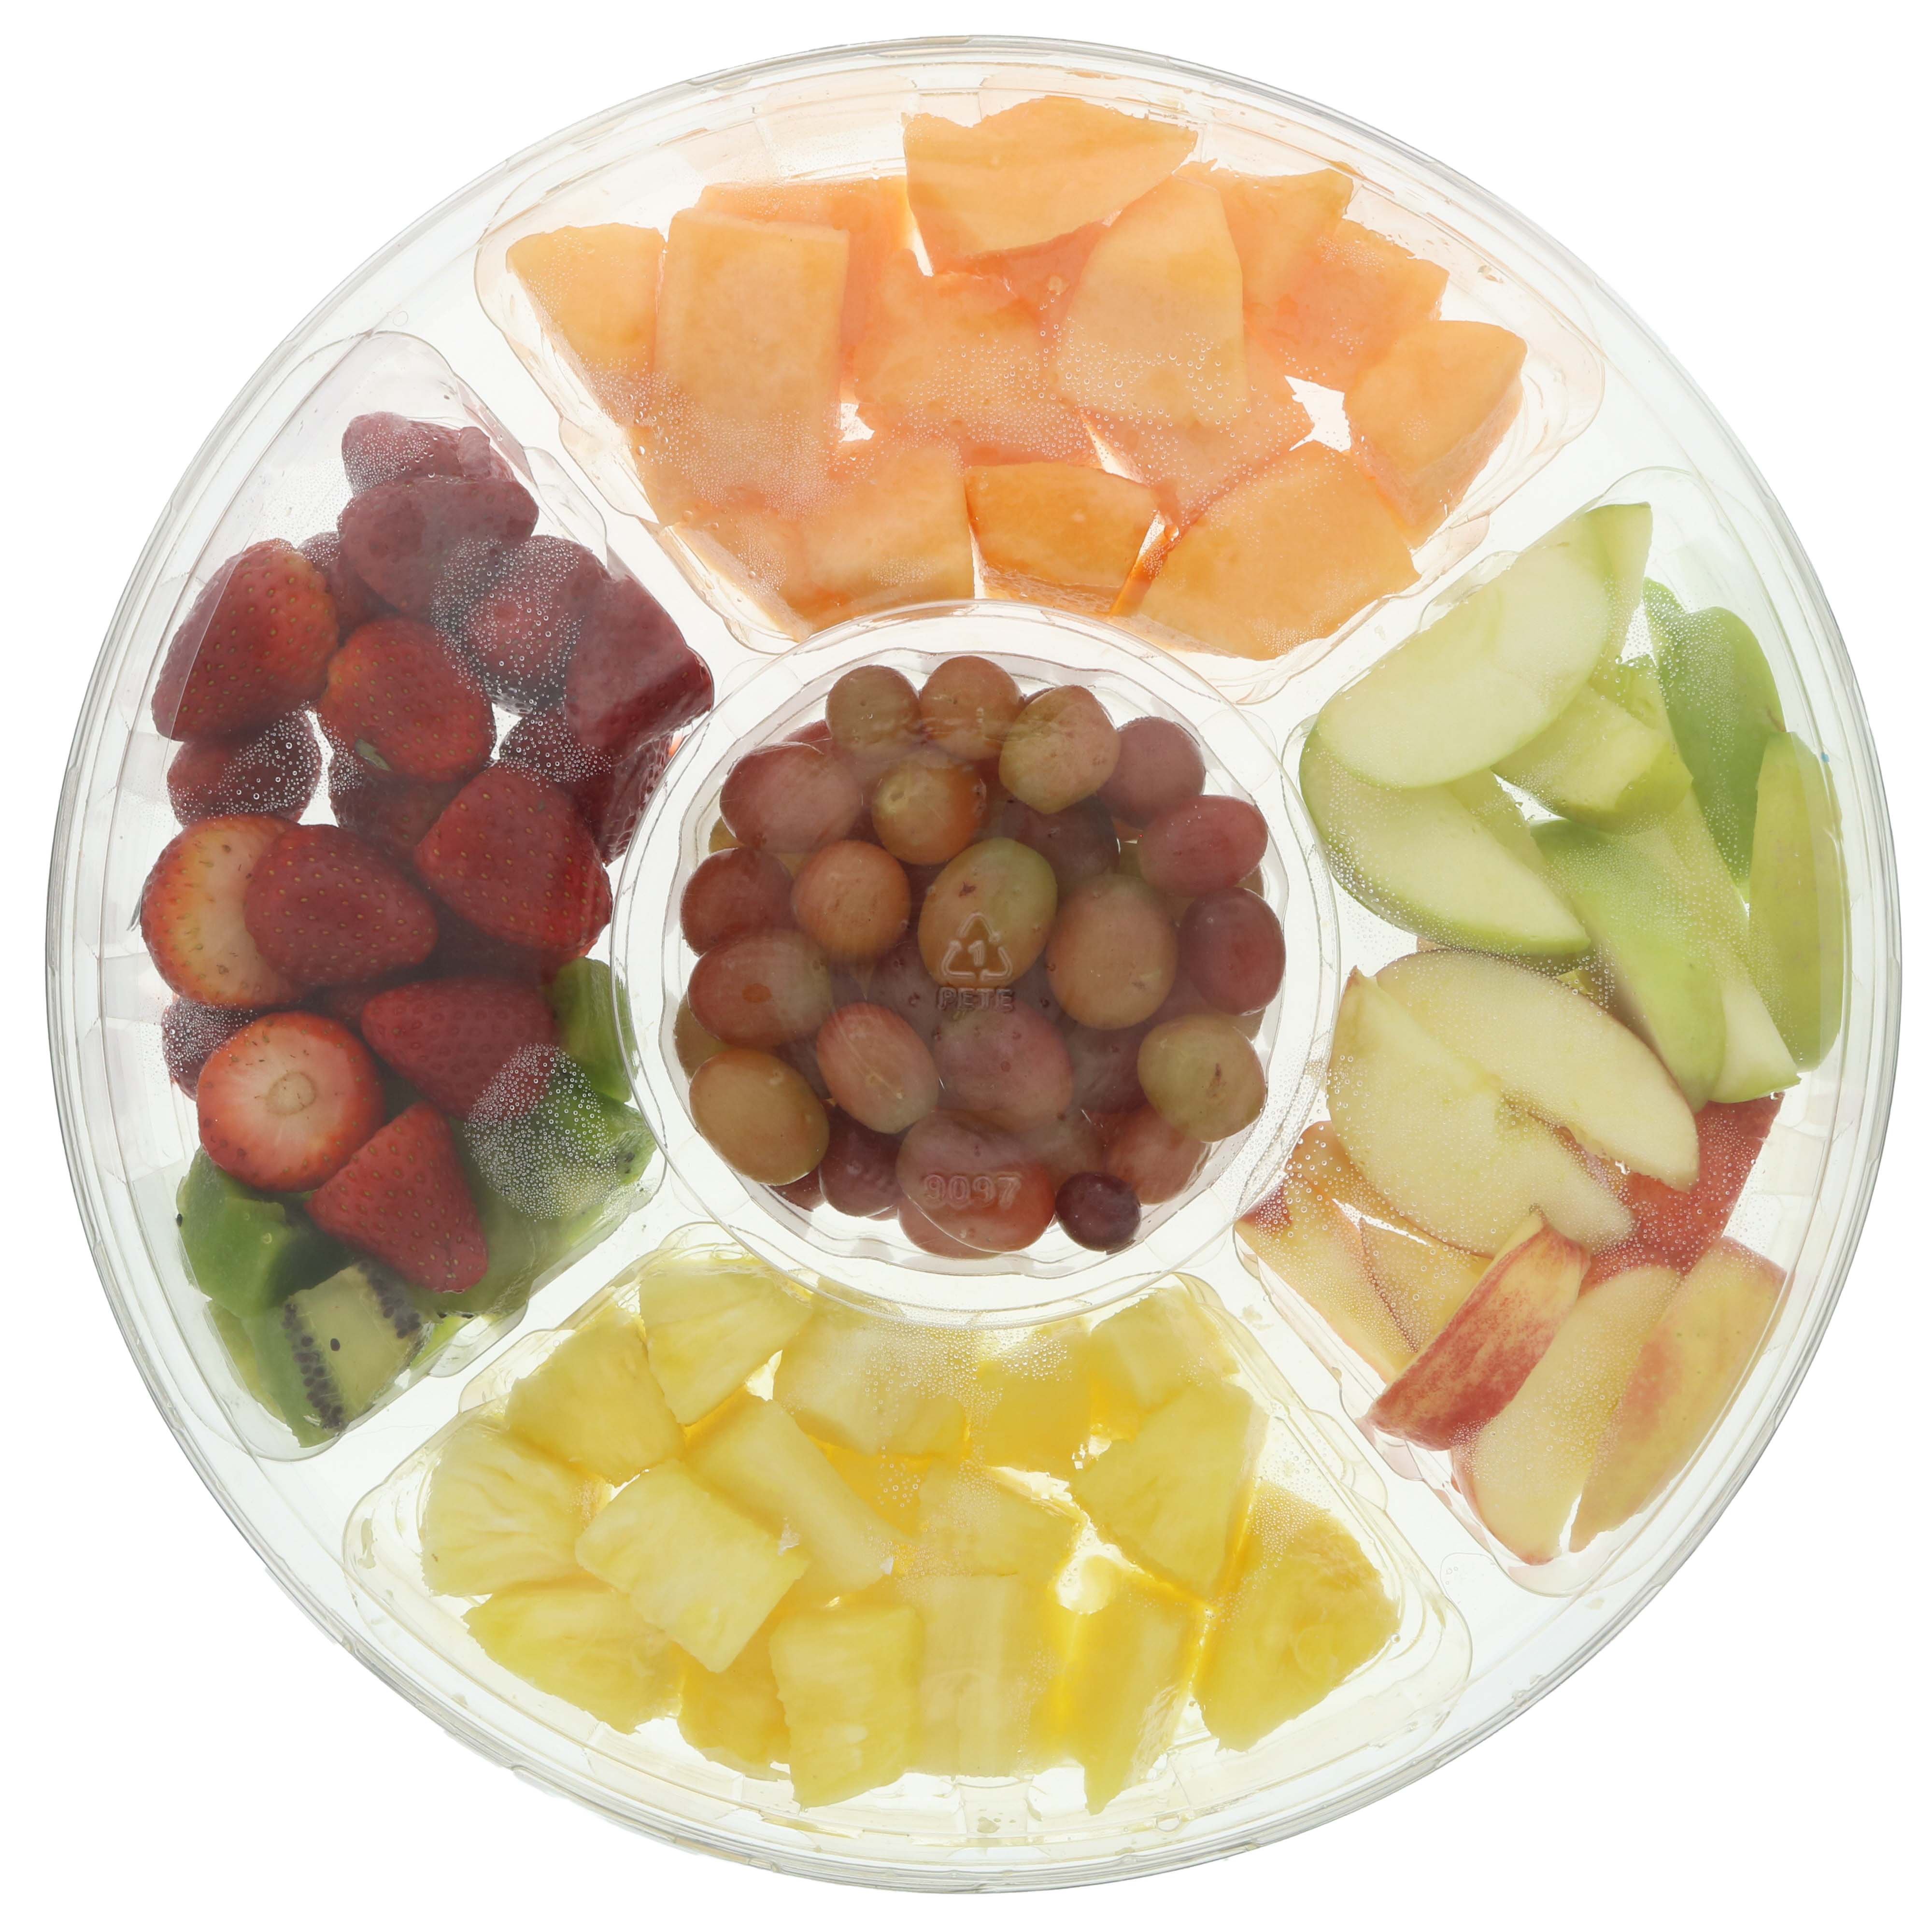 fruit trays for parties